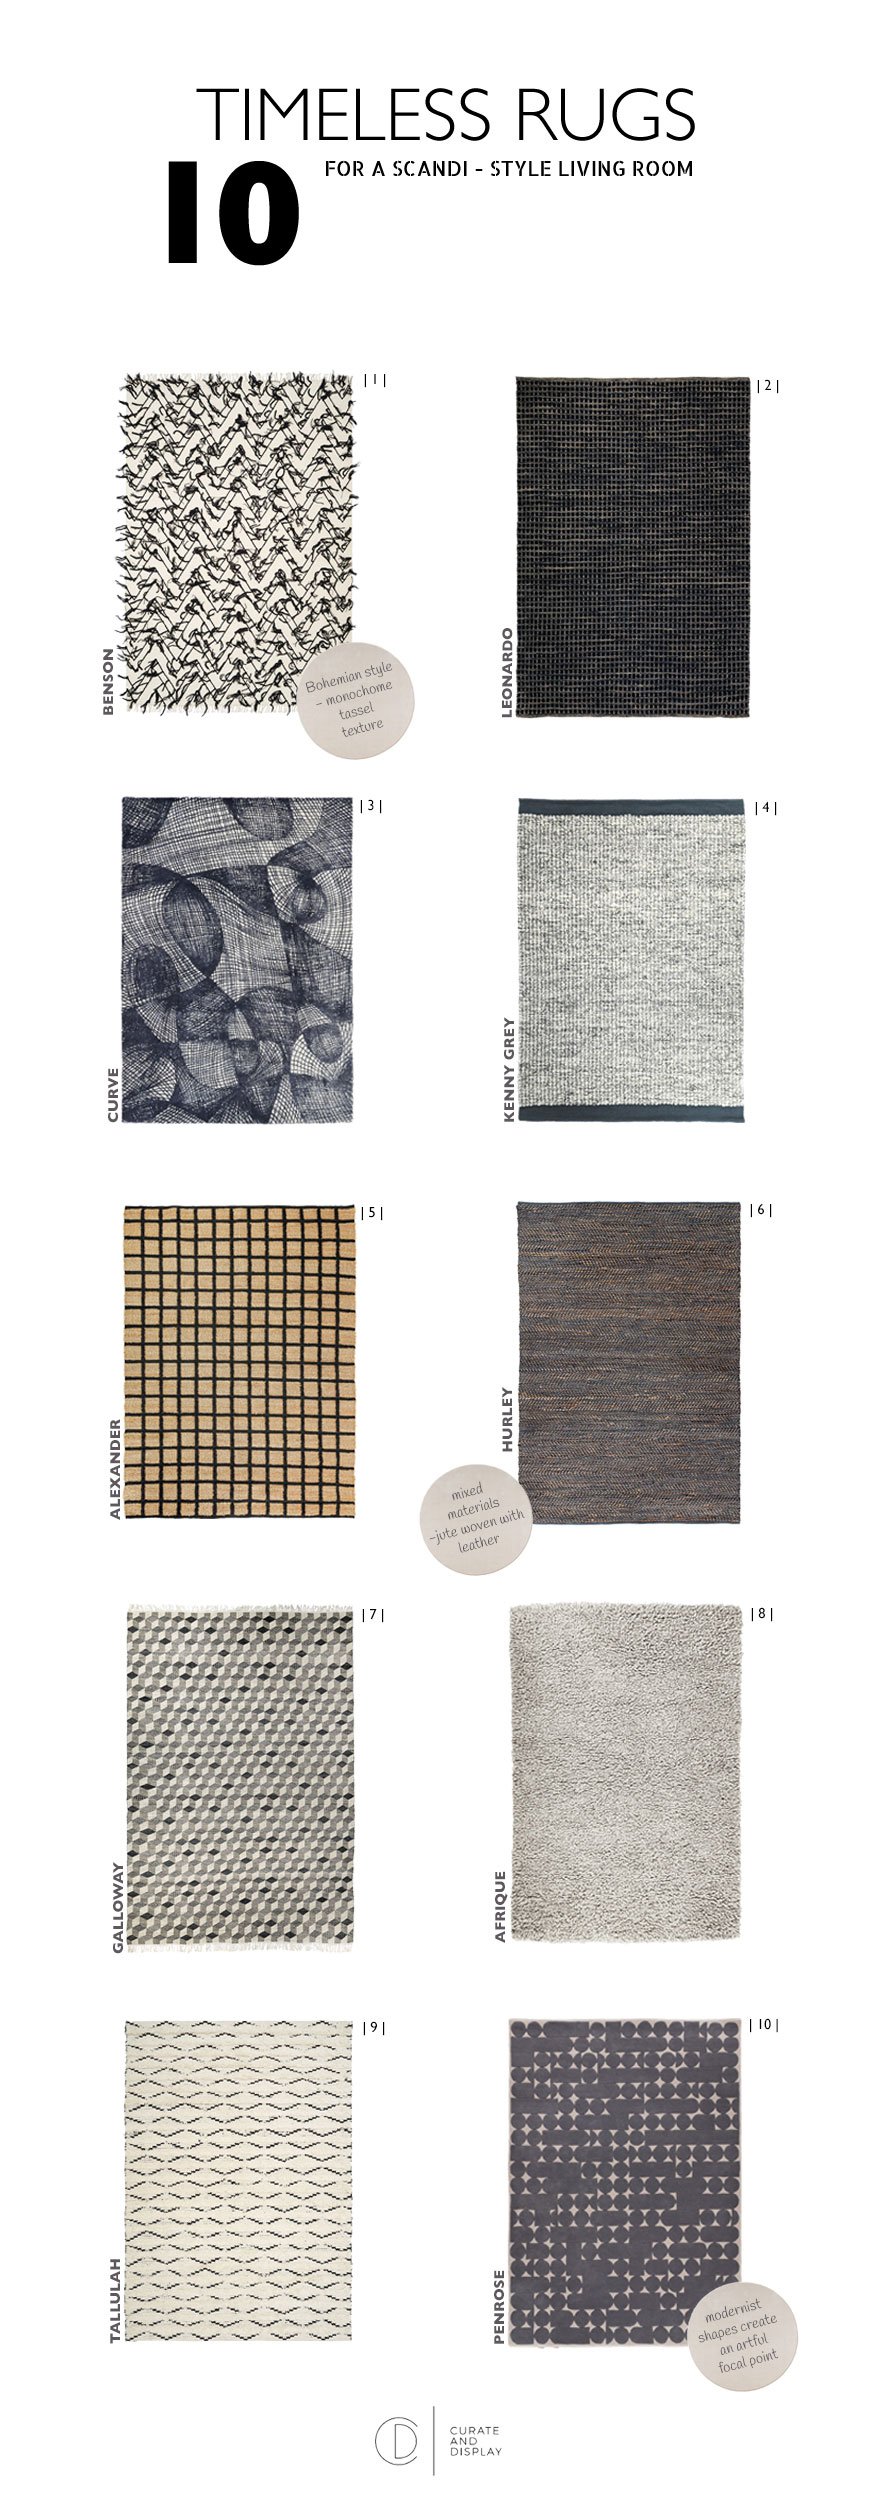 A shopping page for 10 timeless rugs for a Scandi-style living room. 